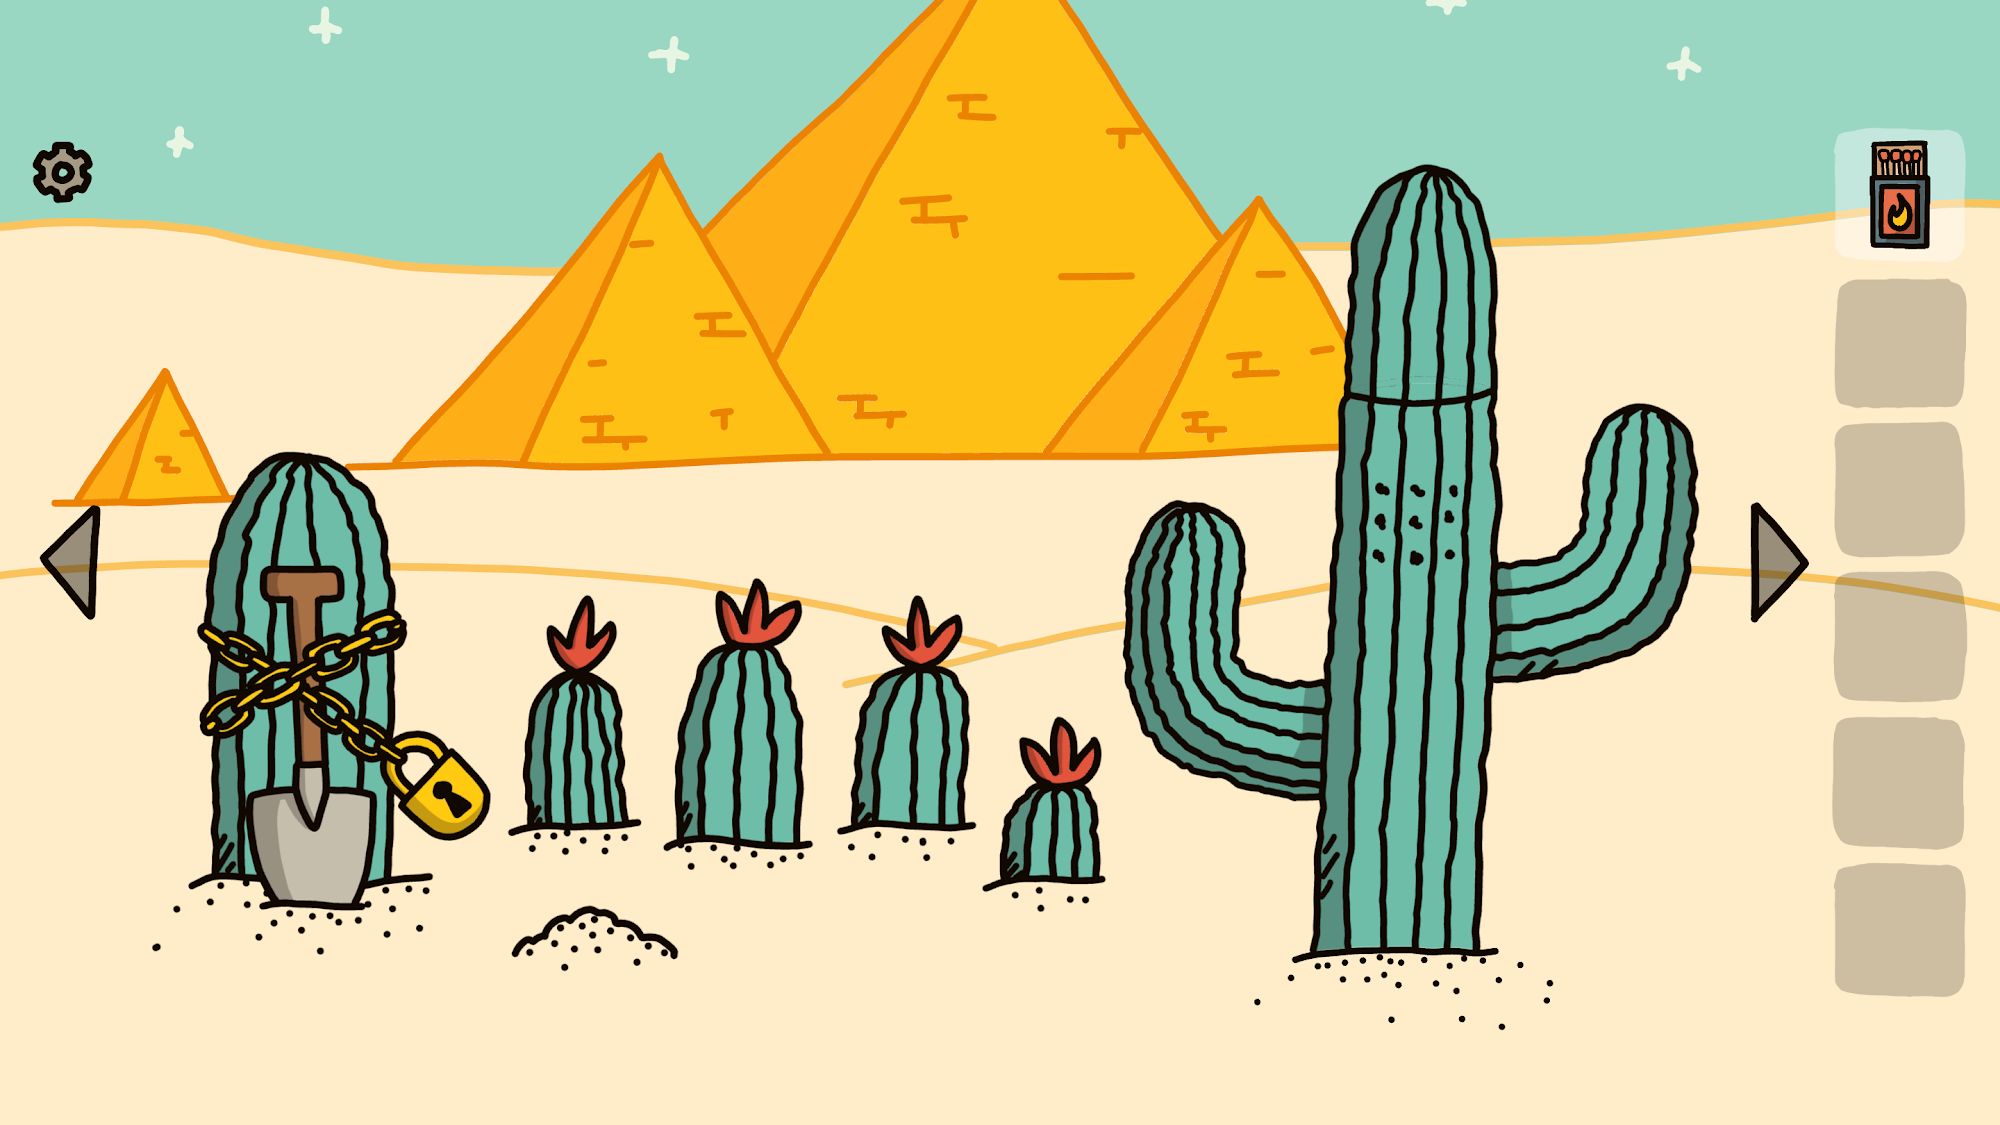 Tiny Quest: Desert - Android game screenshots.